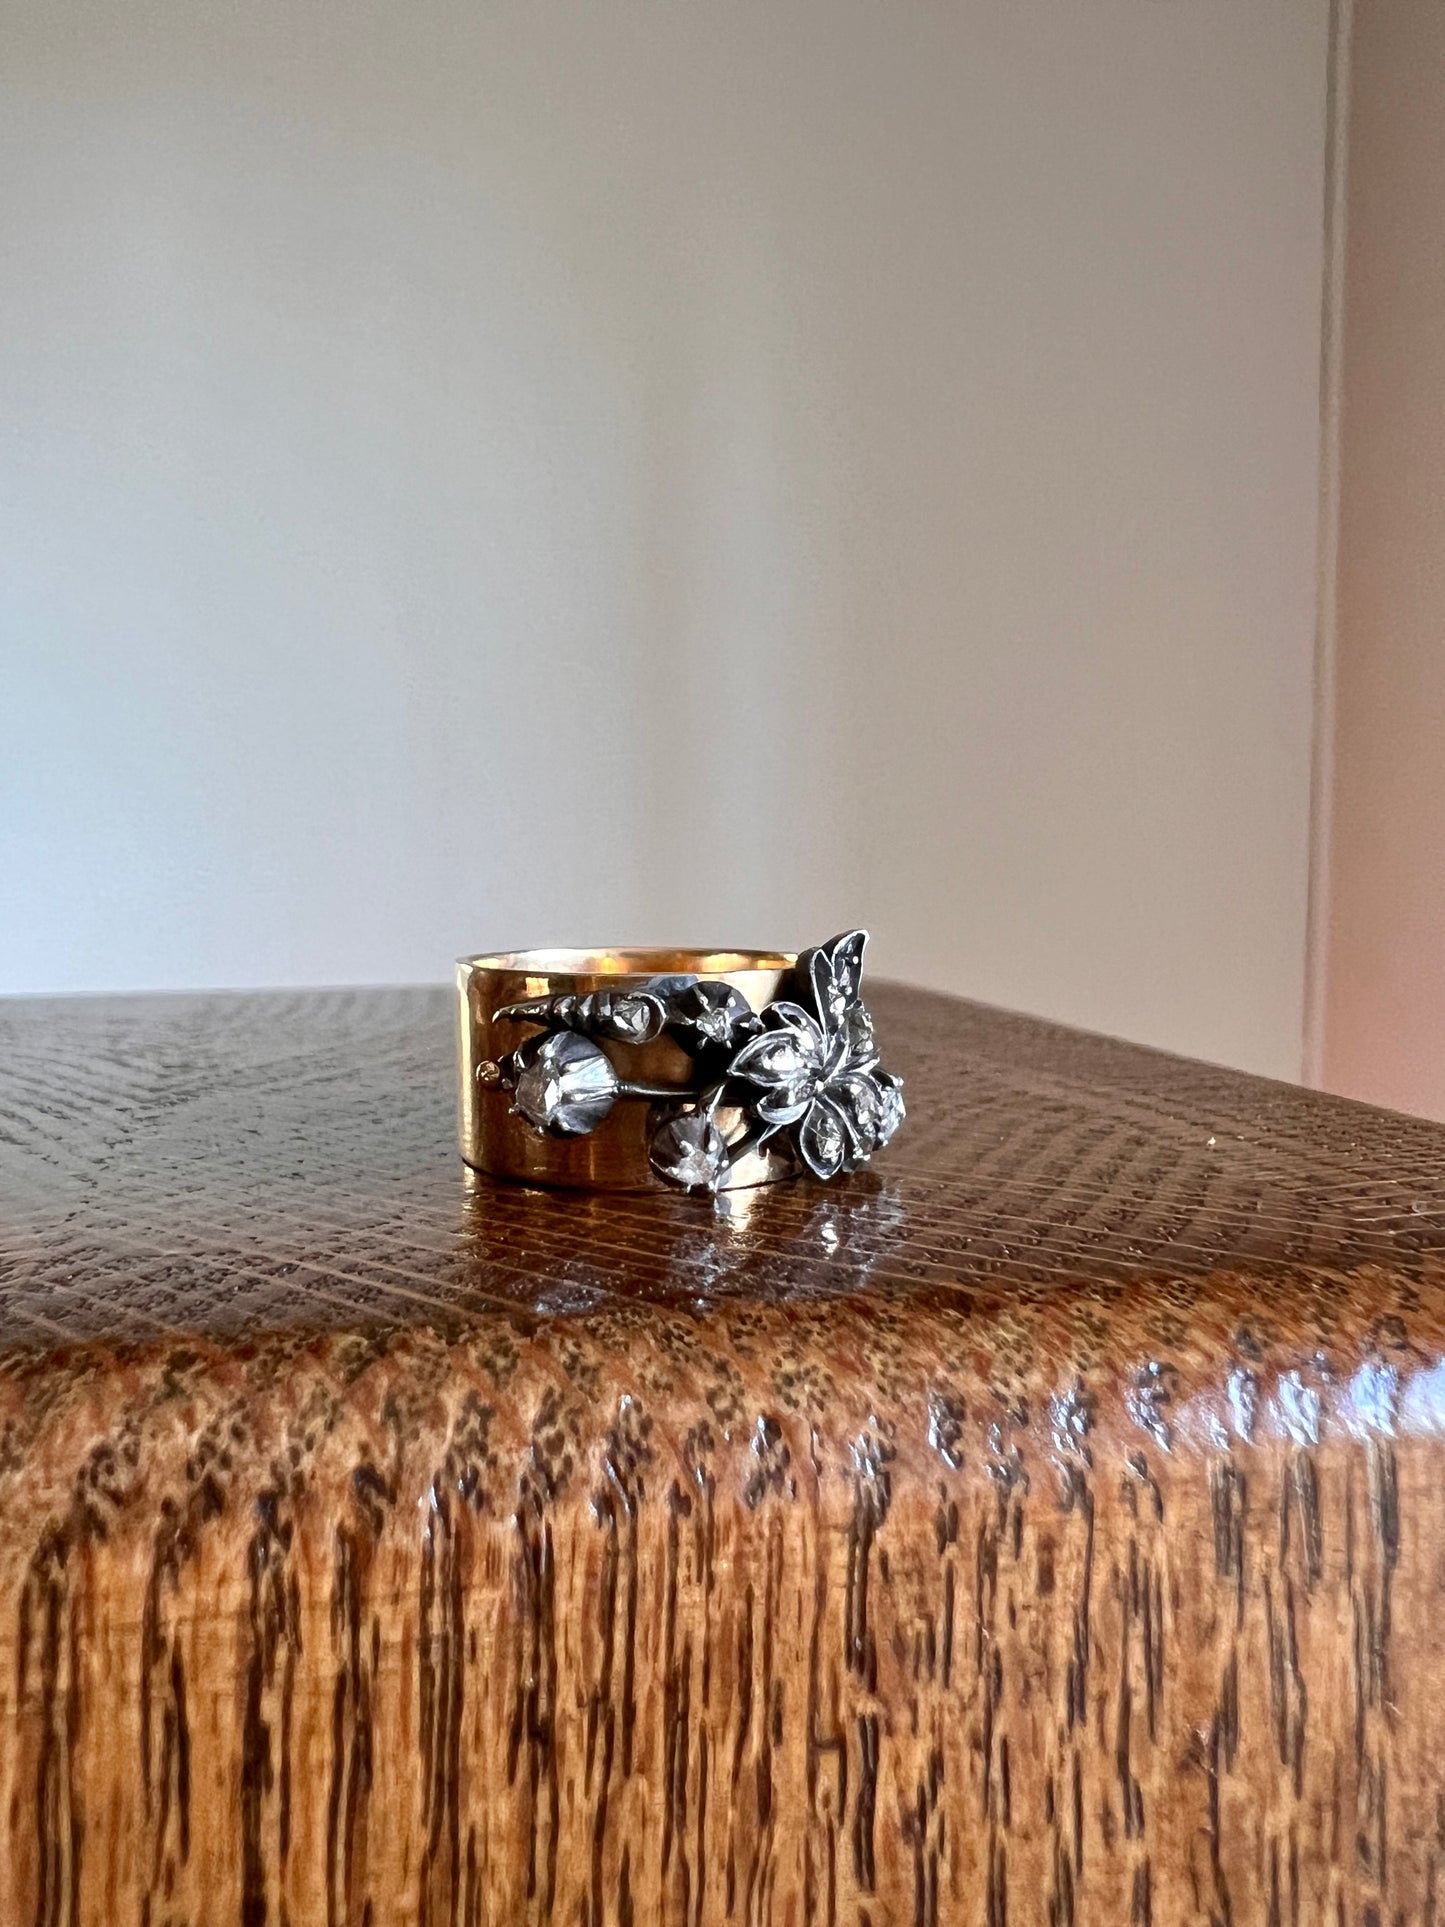 HEAVY Georgian Rose Cut DIAMOND Giardinetti Ring 11.1g 18k Gold 10mm Wide Cigar Band Silver Collets Floral Figural Antique